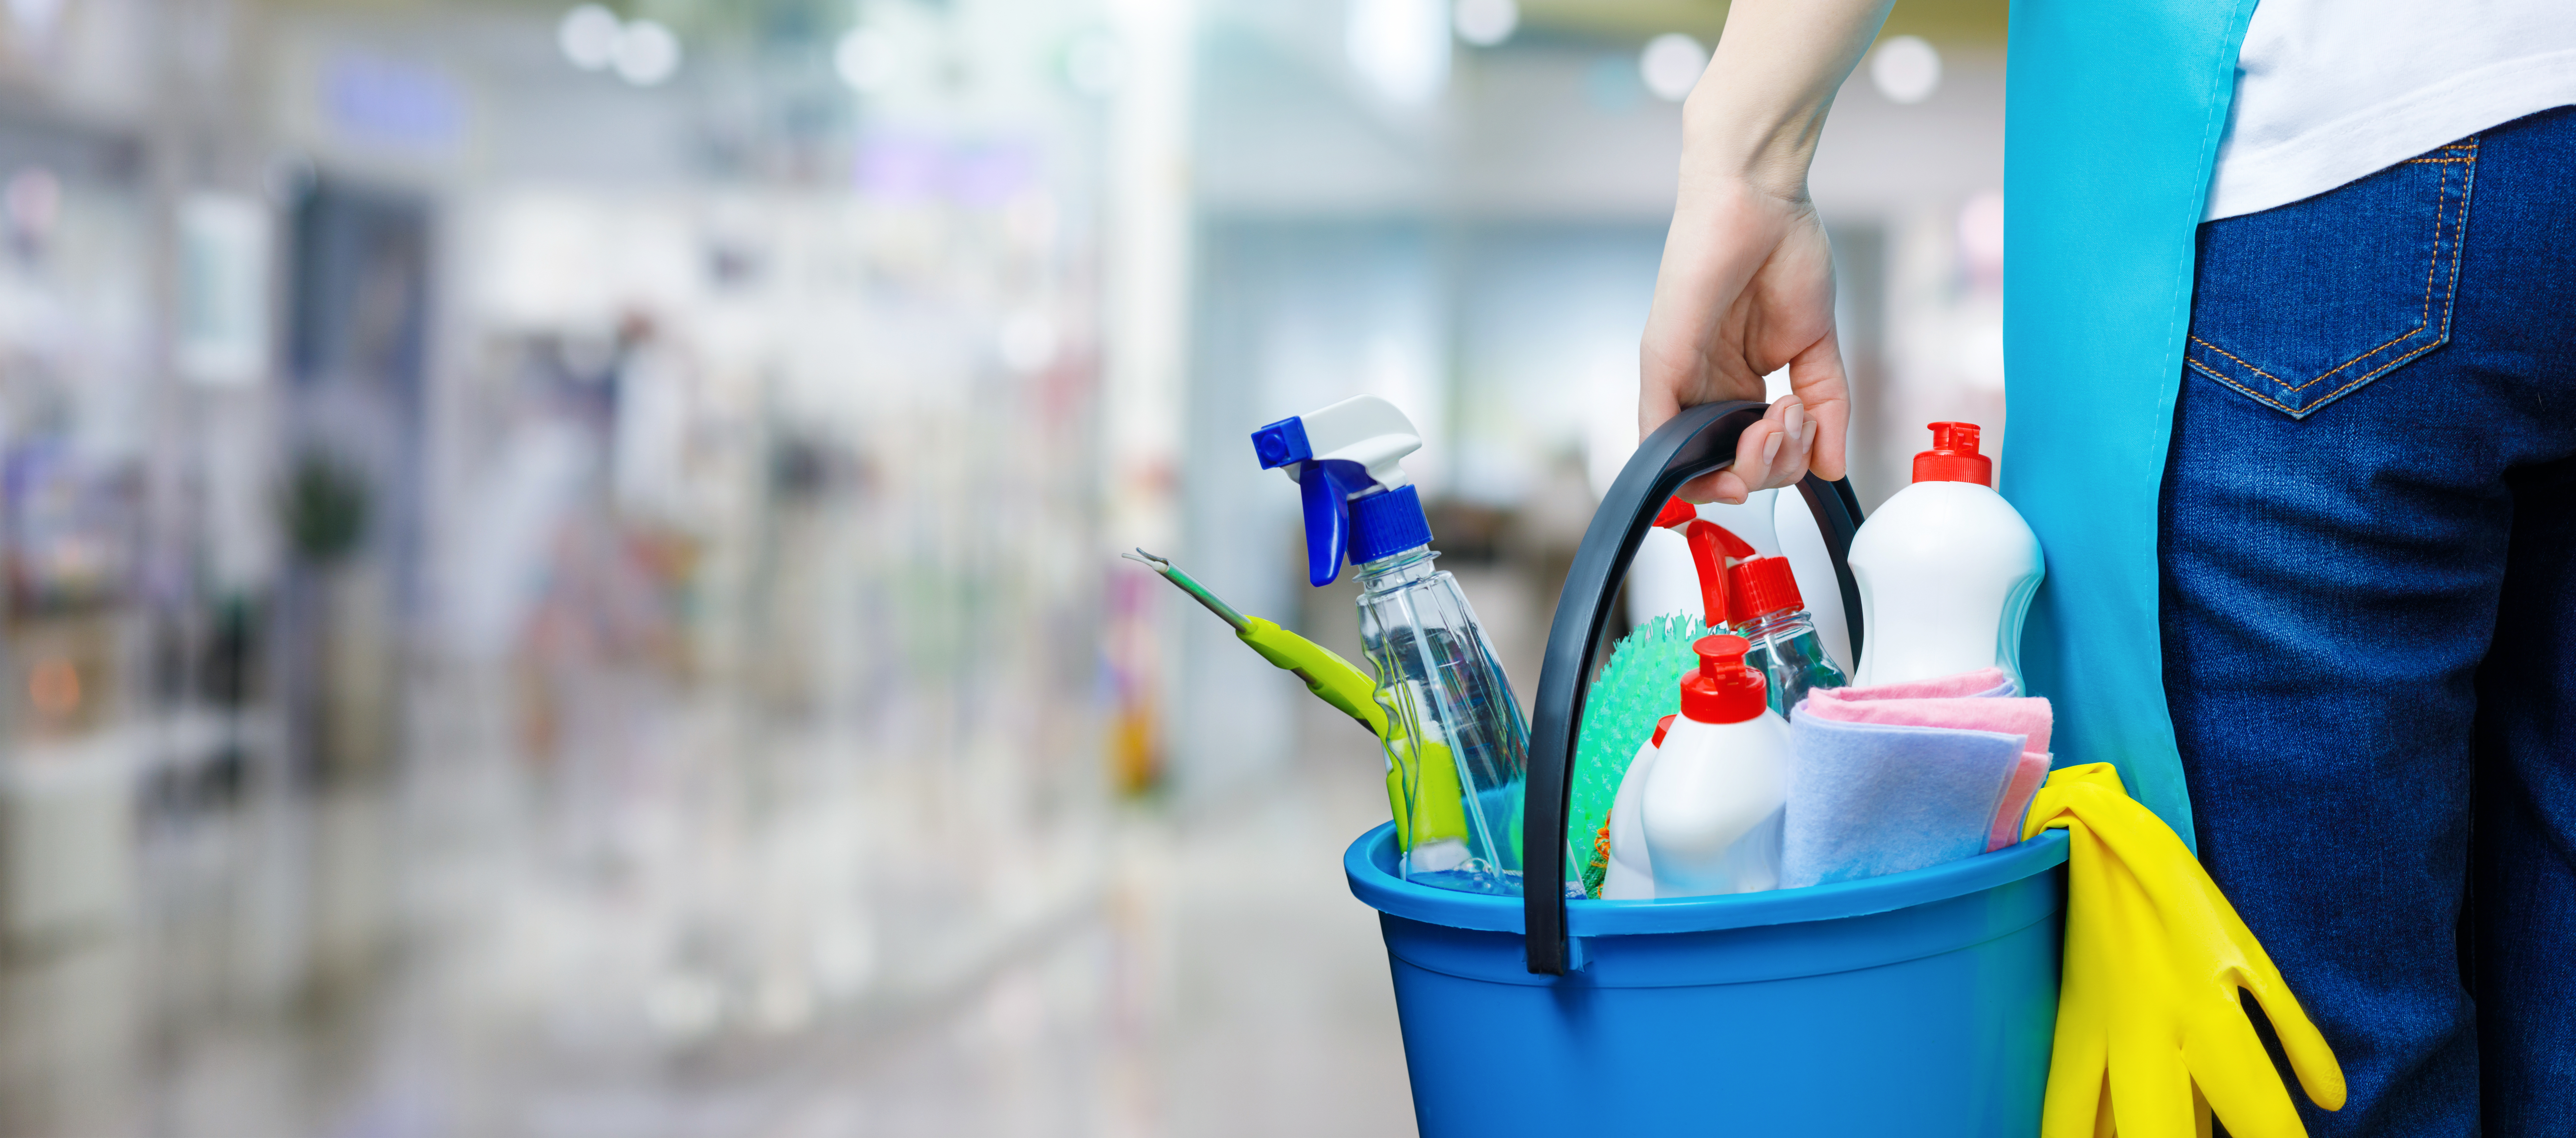 3 Things To Consider When Hiring Cleaning Staff